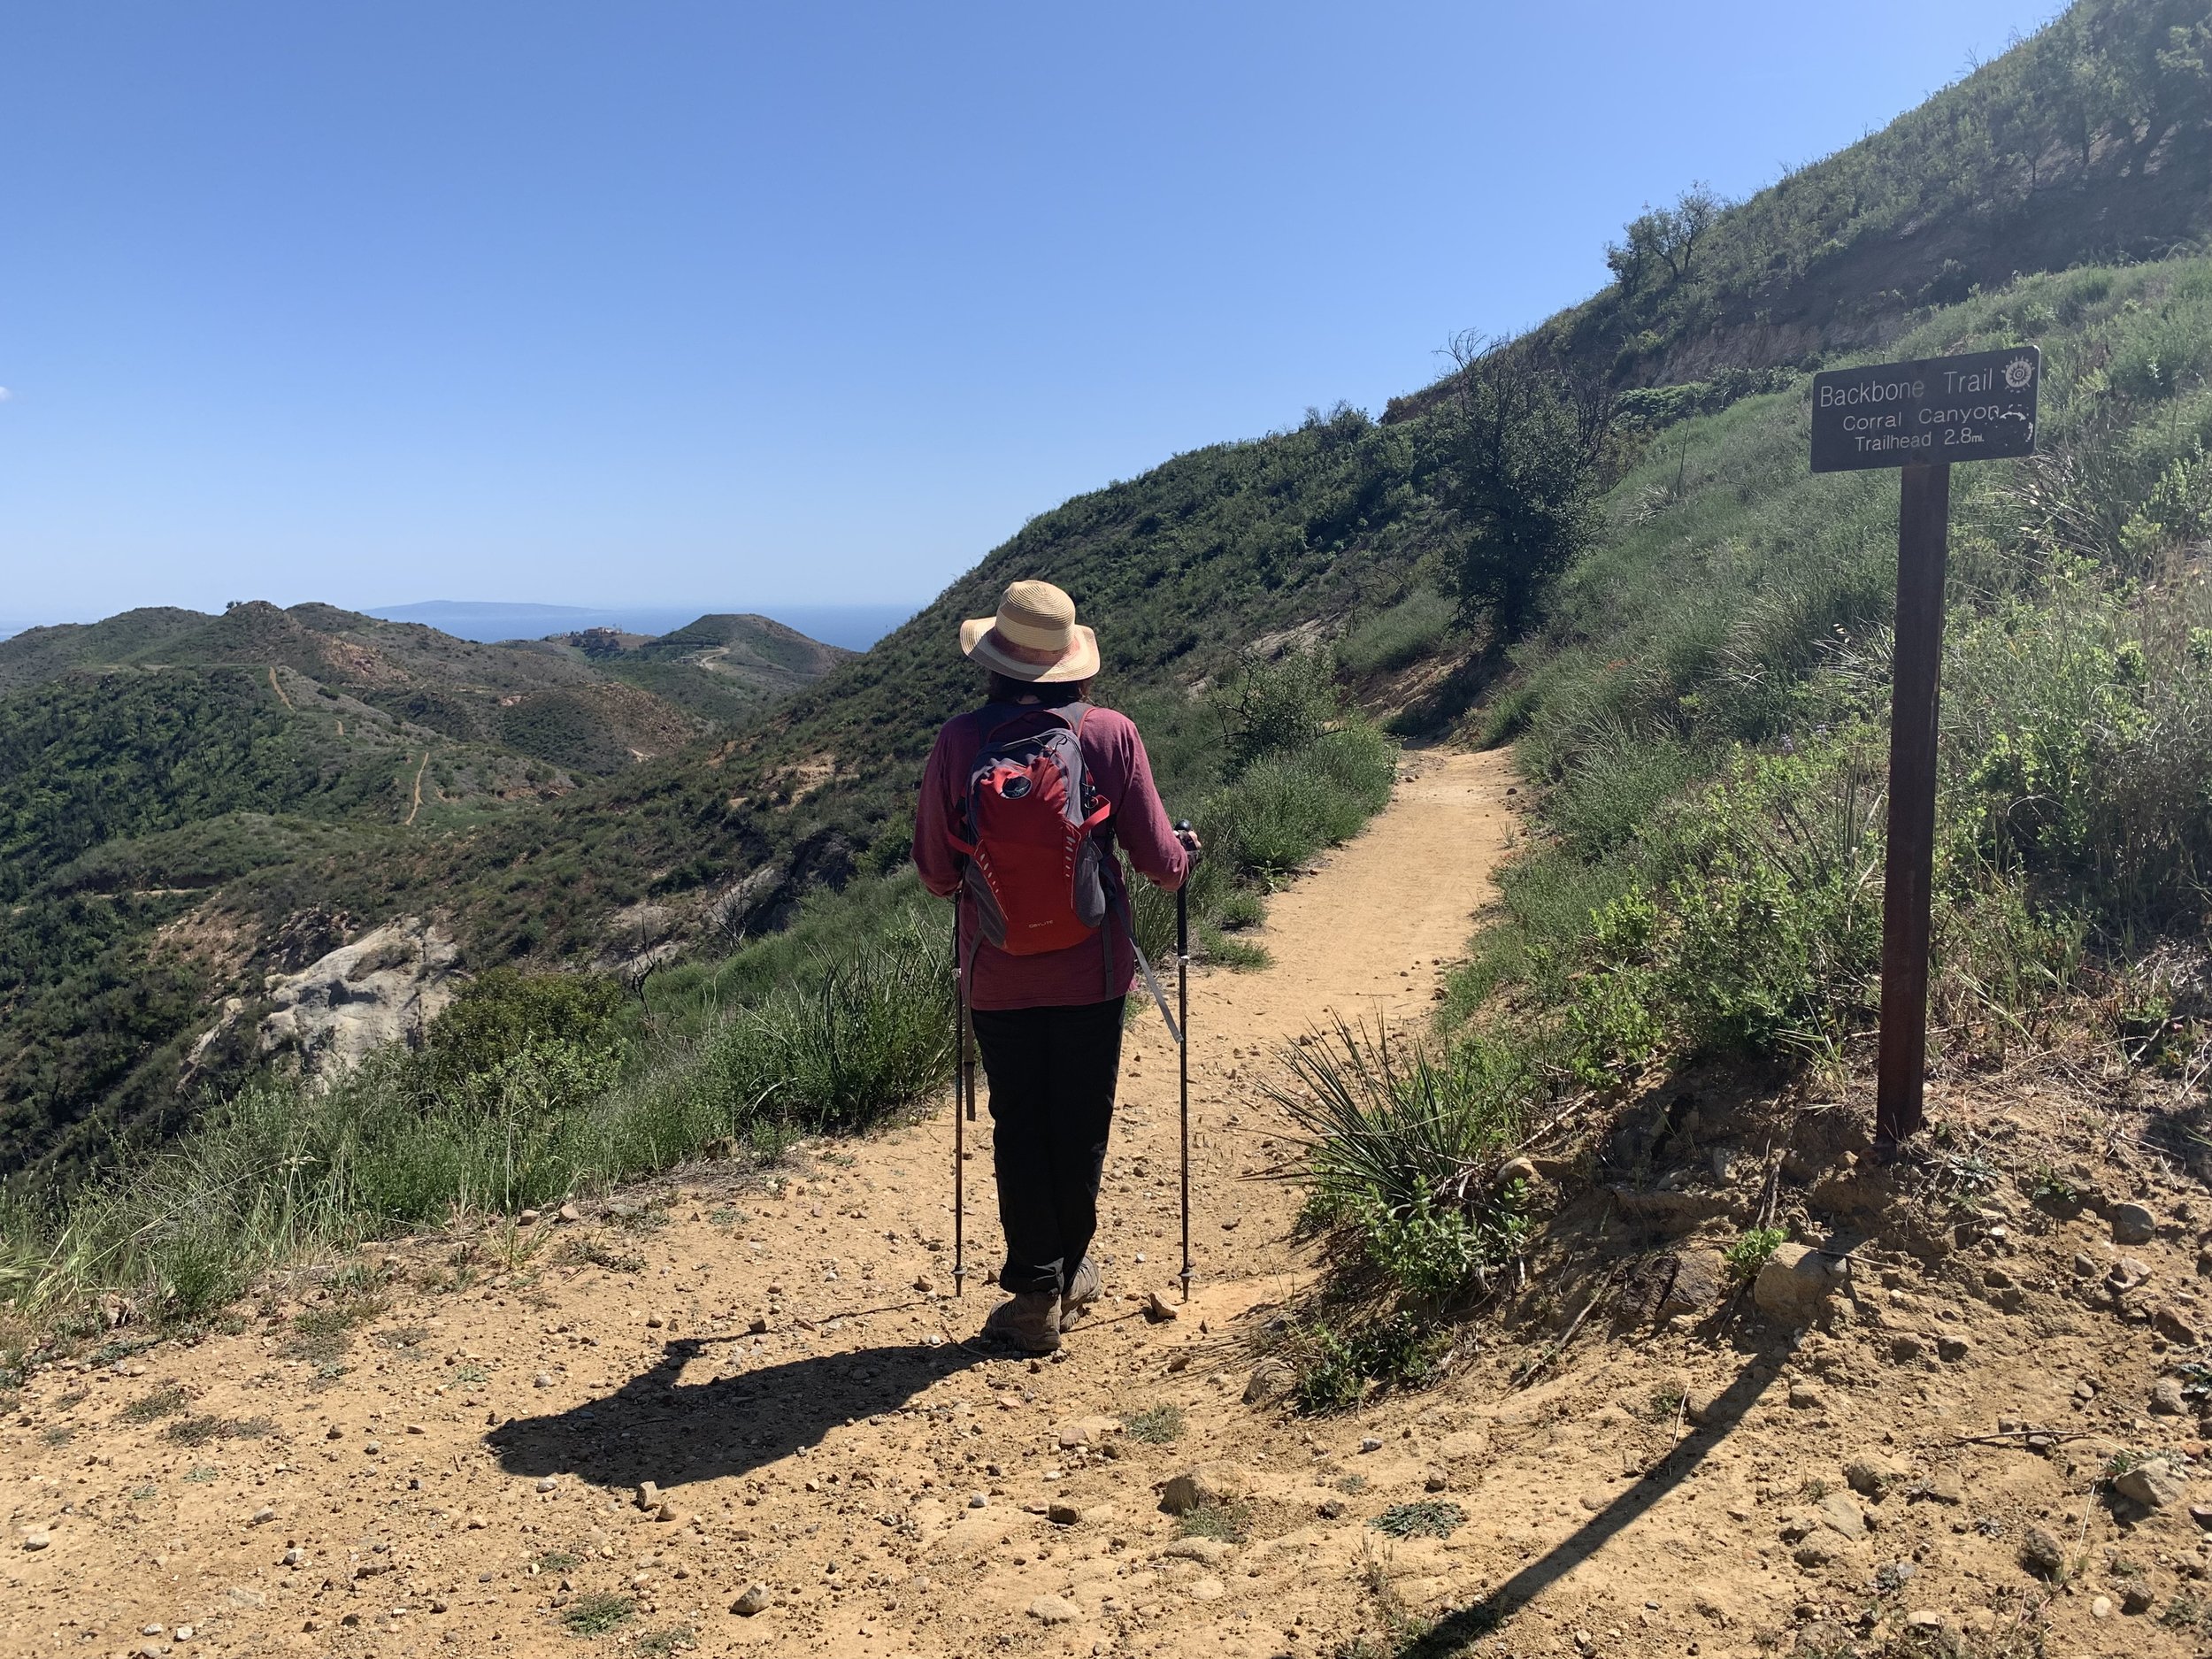 Heading down into Solstice Canyon